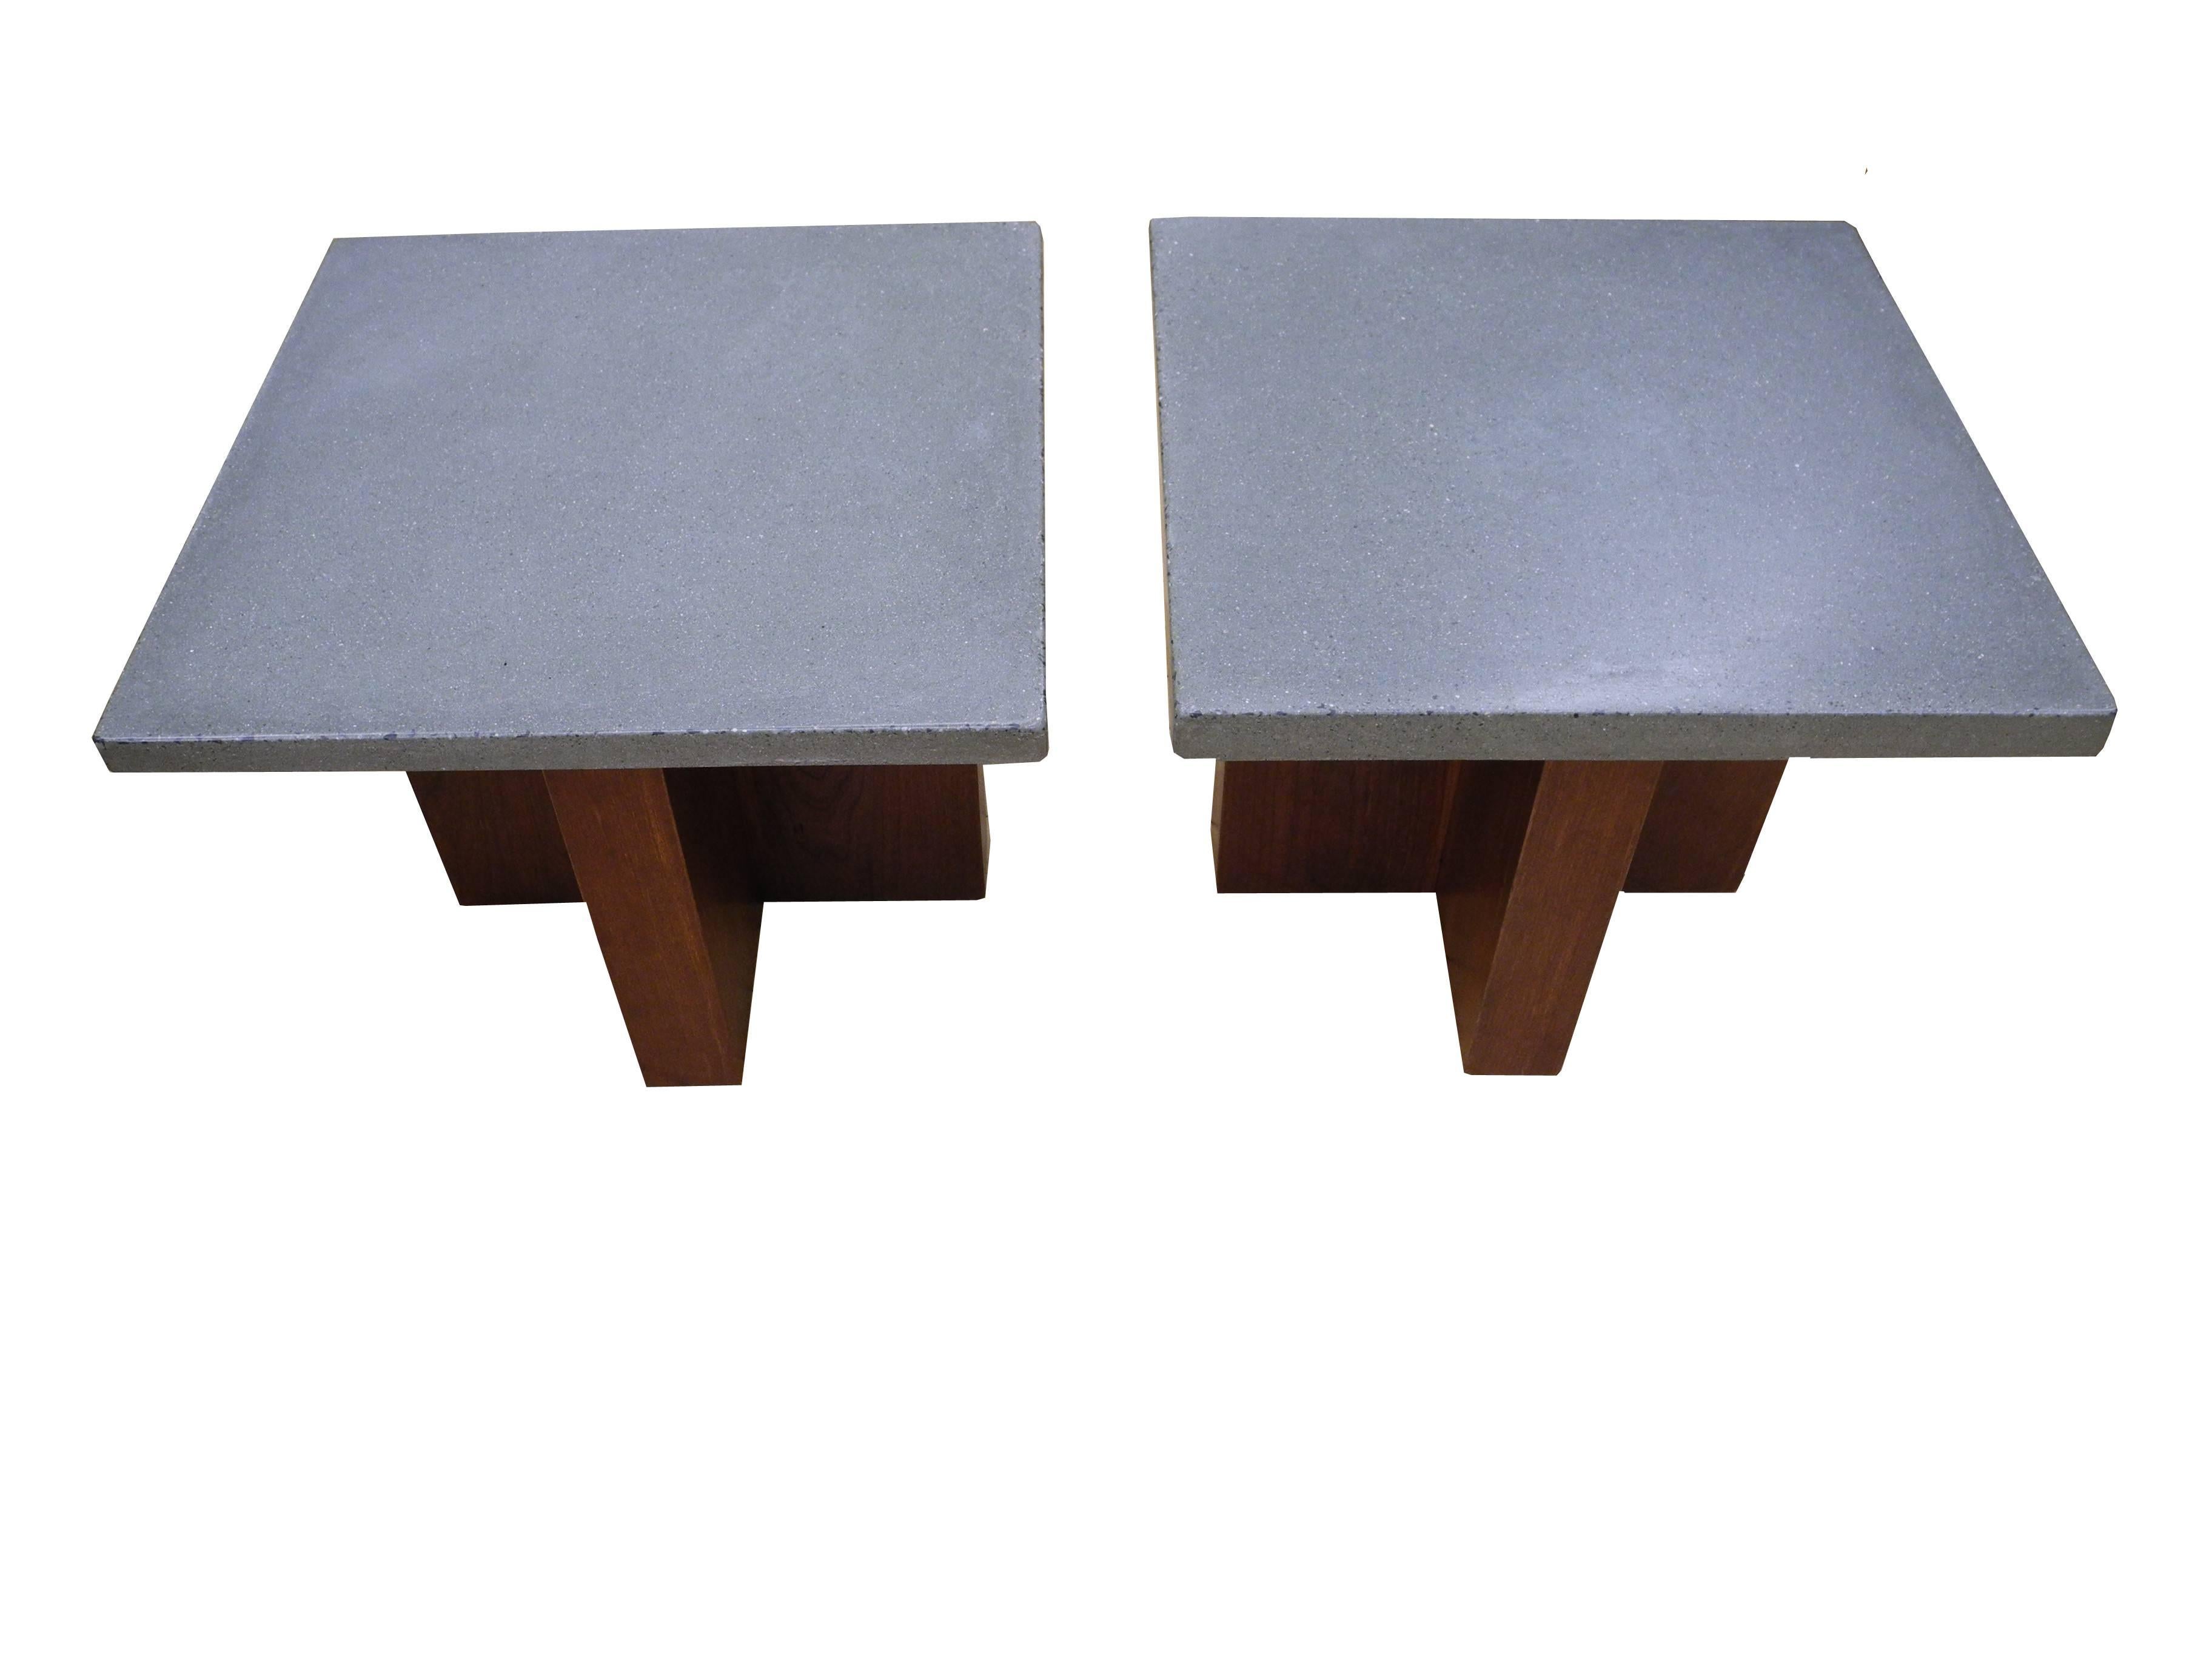 These tables are sold as a pair. Own the charm of two, one of a kind, handmade tables. Both are 16 inches tall but one top is slightly thicker (the height of the base was adjusted so they are both the same height). Made of solid cherry stained in